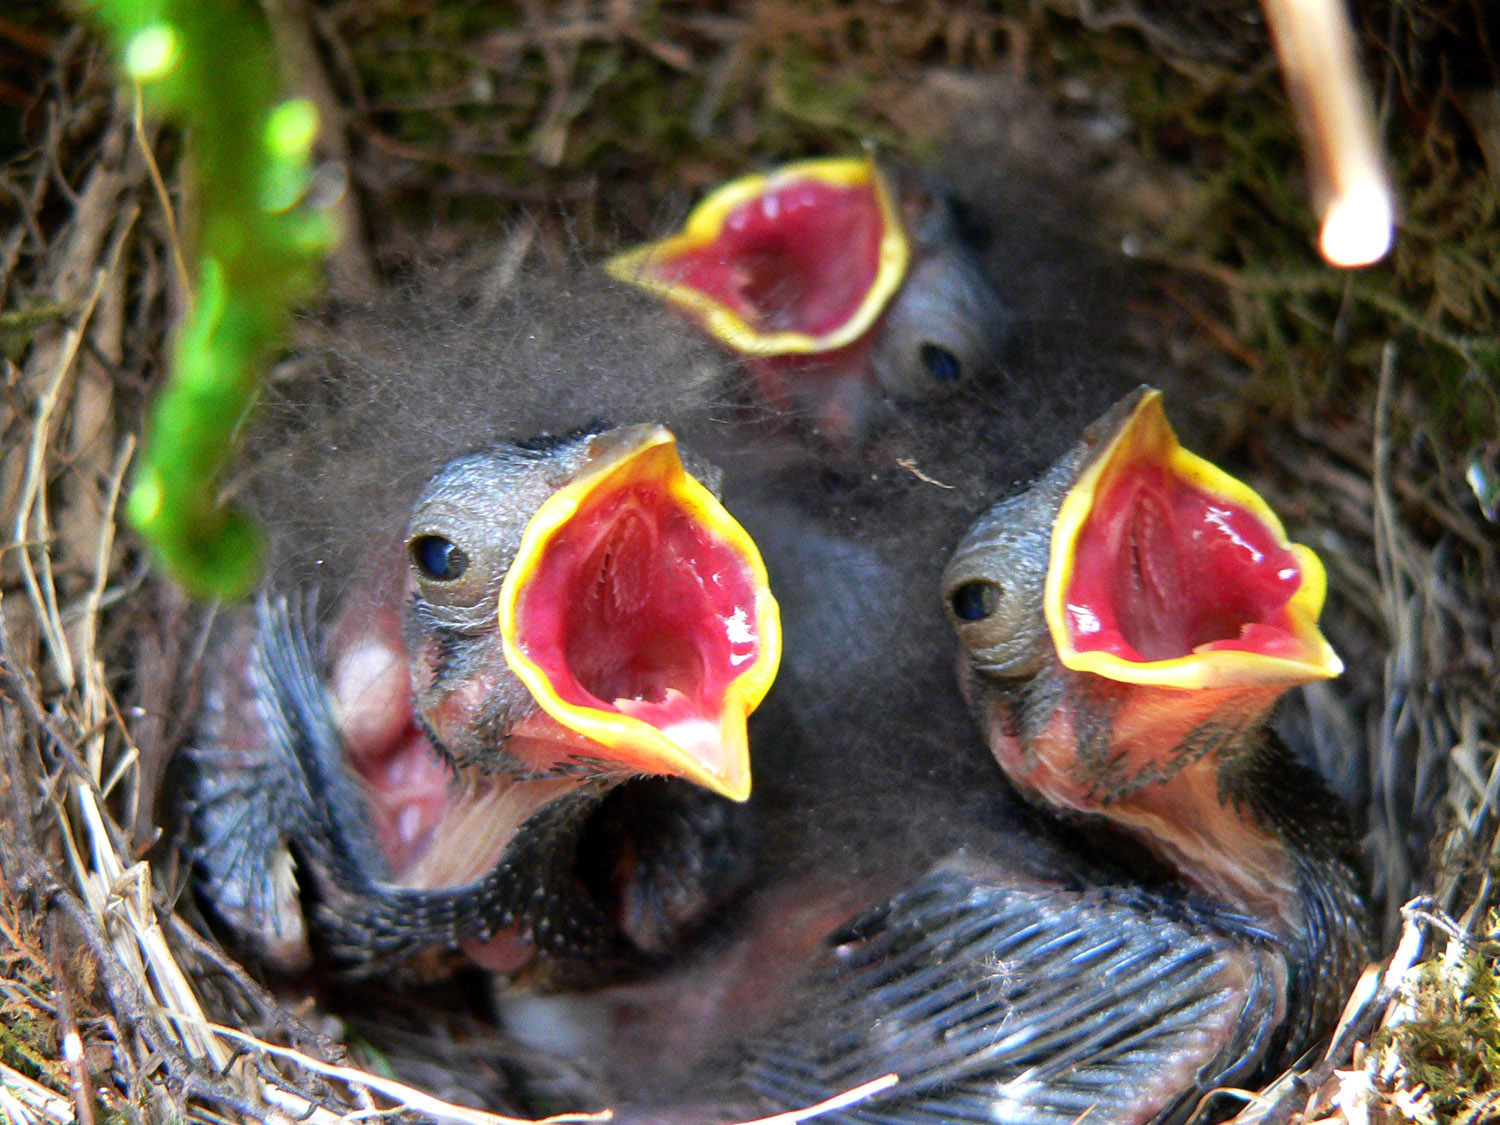 Dark-eyed Junco baby birds with their mouths opened wide waiting on food